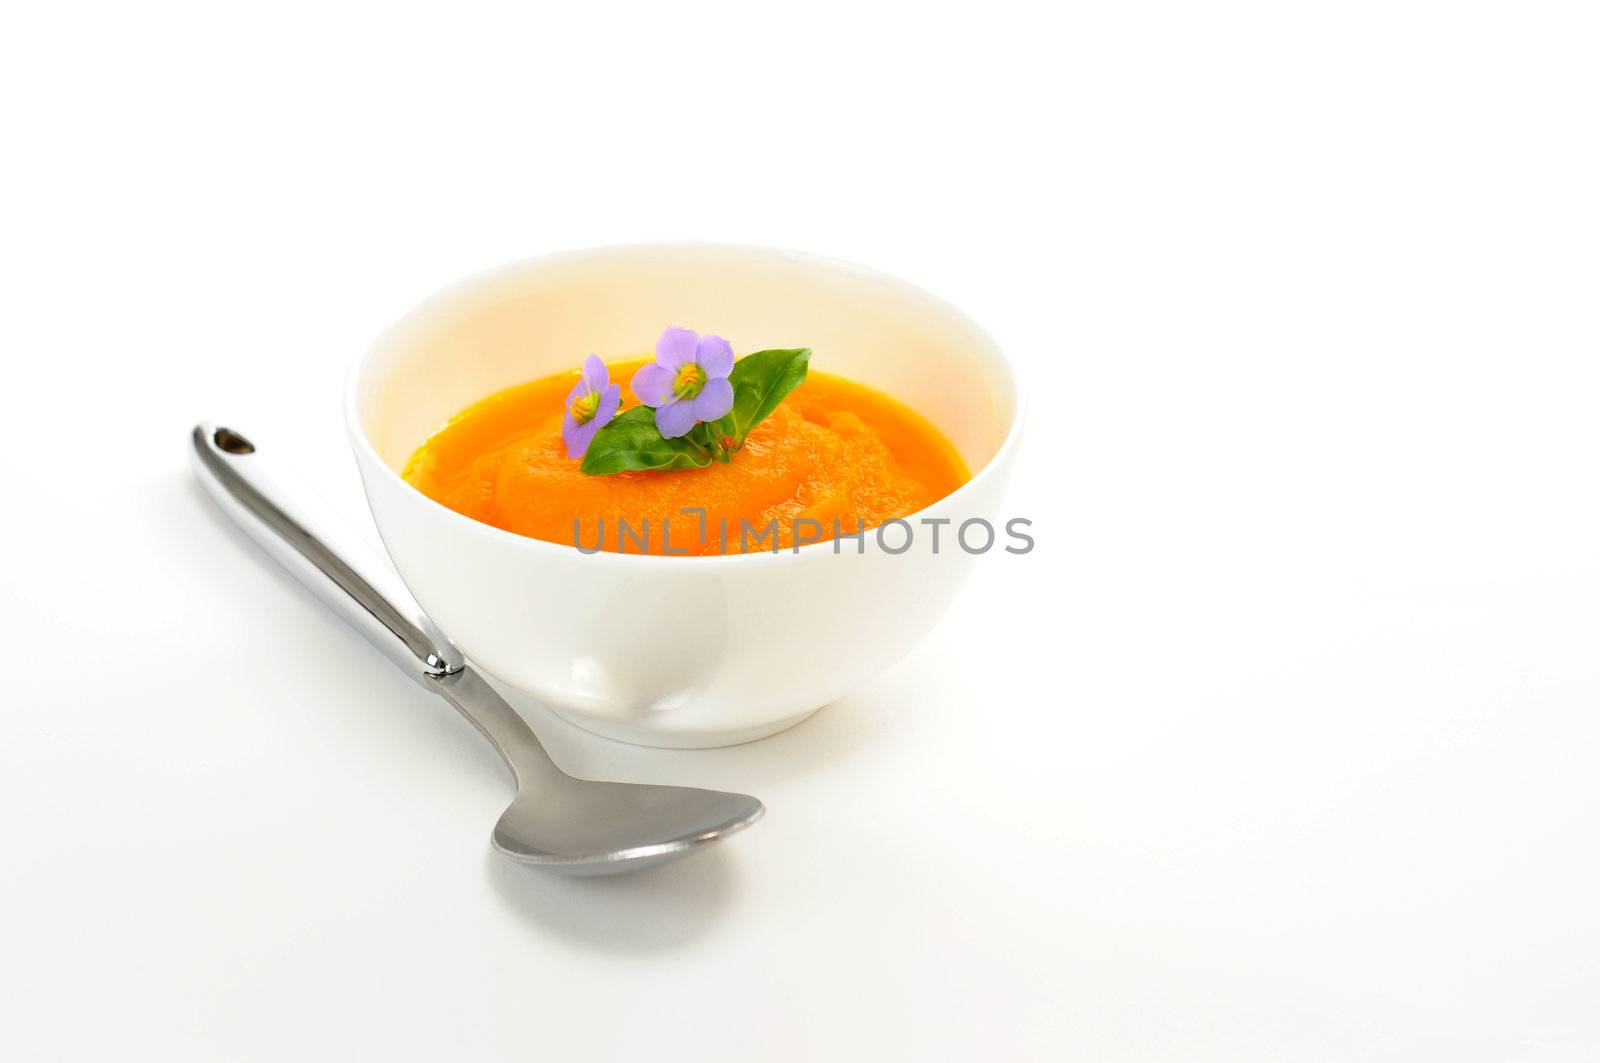 Delicious homemade carrot soup with edible flower garnish.